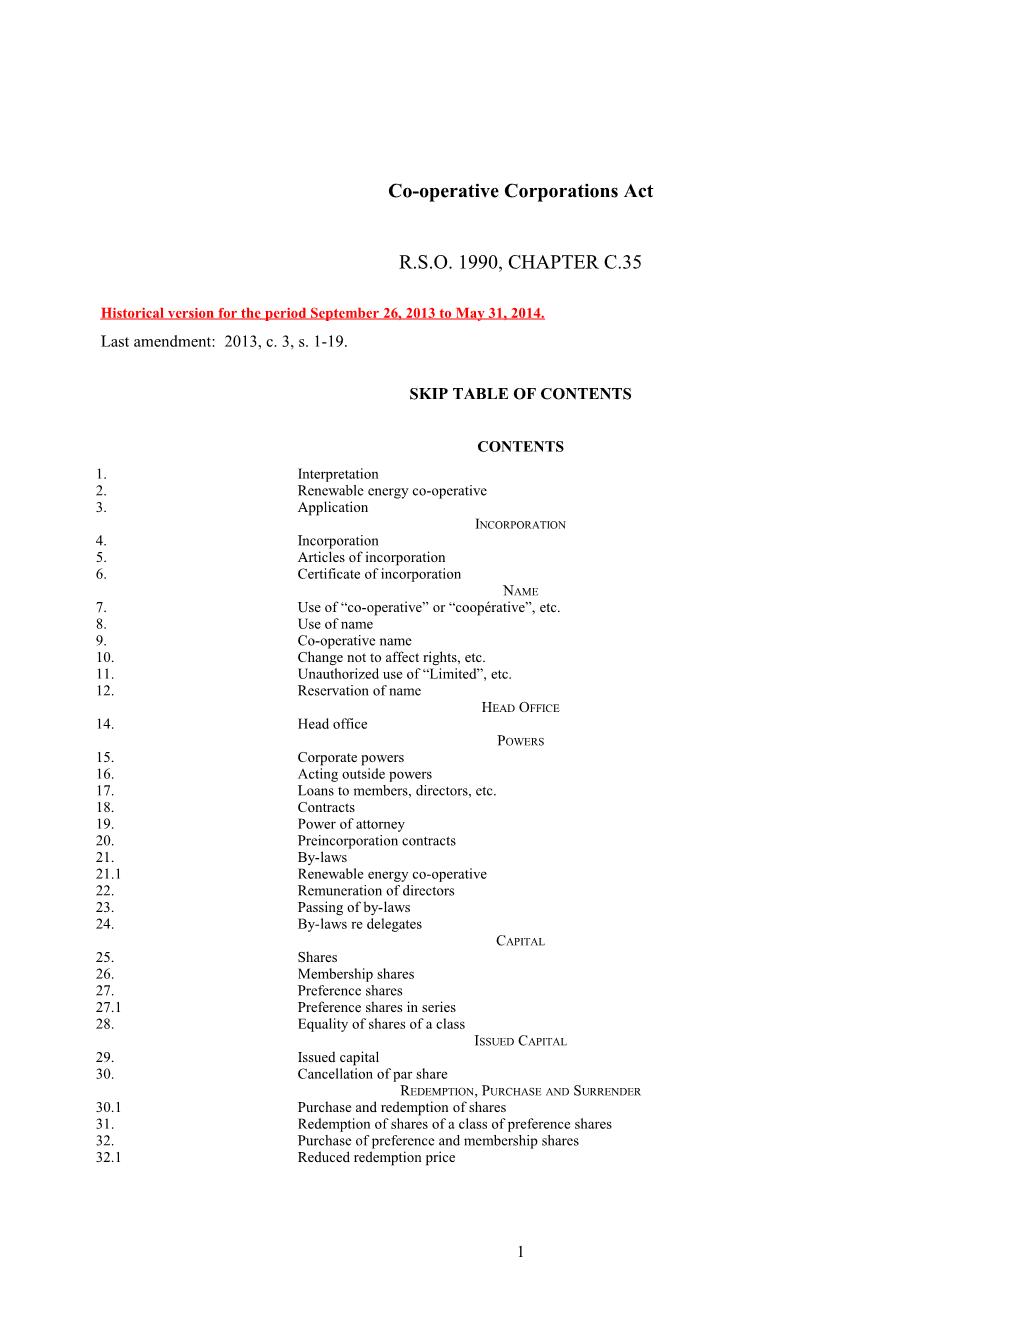 Co-Operative Corporations Act, R.S.O. 1990, C. C.35